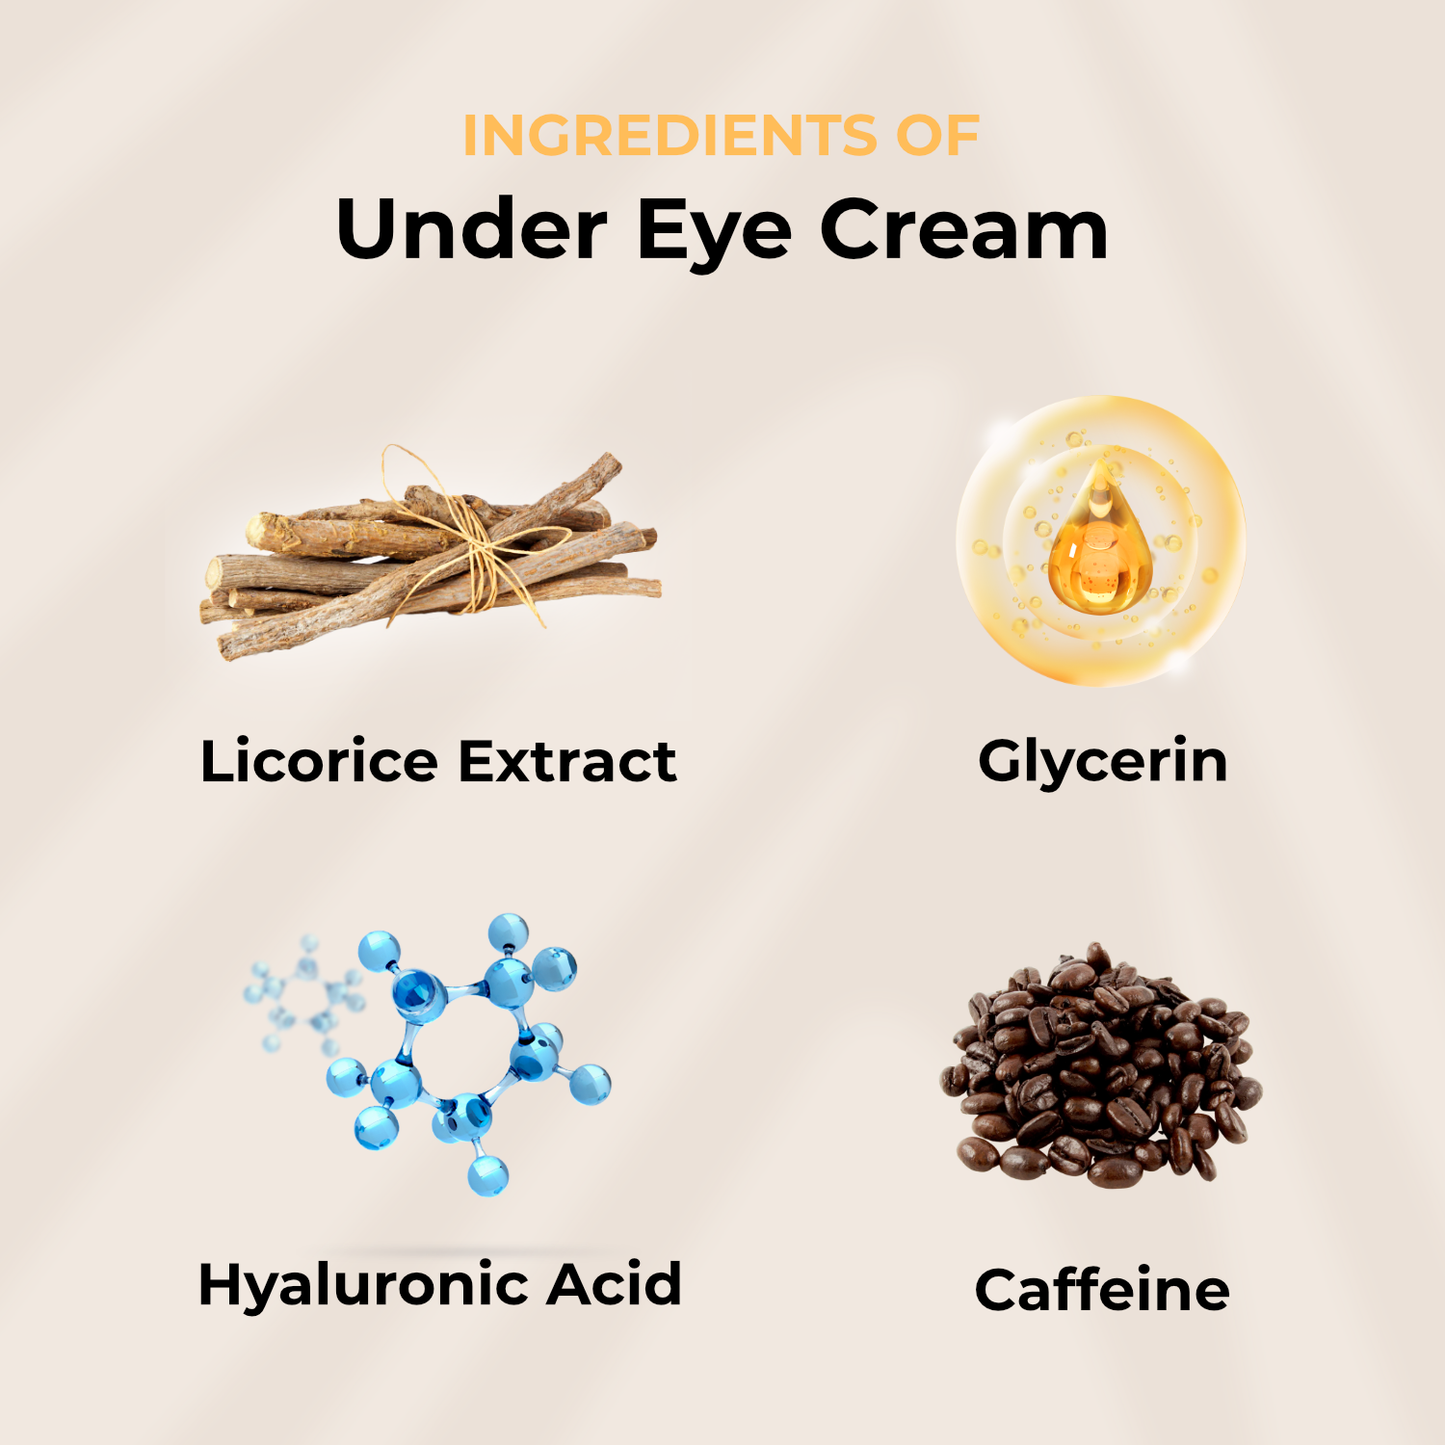 Under Eye Cream (for dark circles and puffiness)